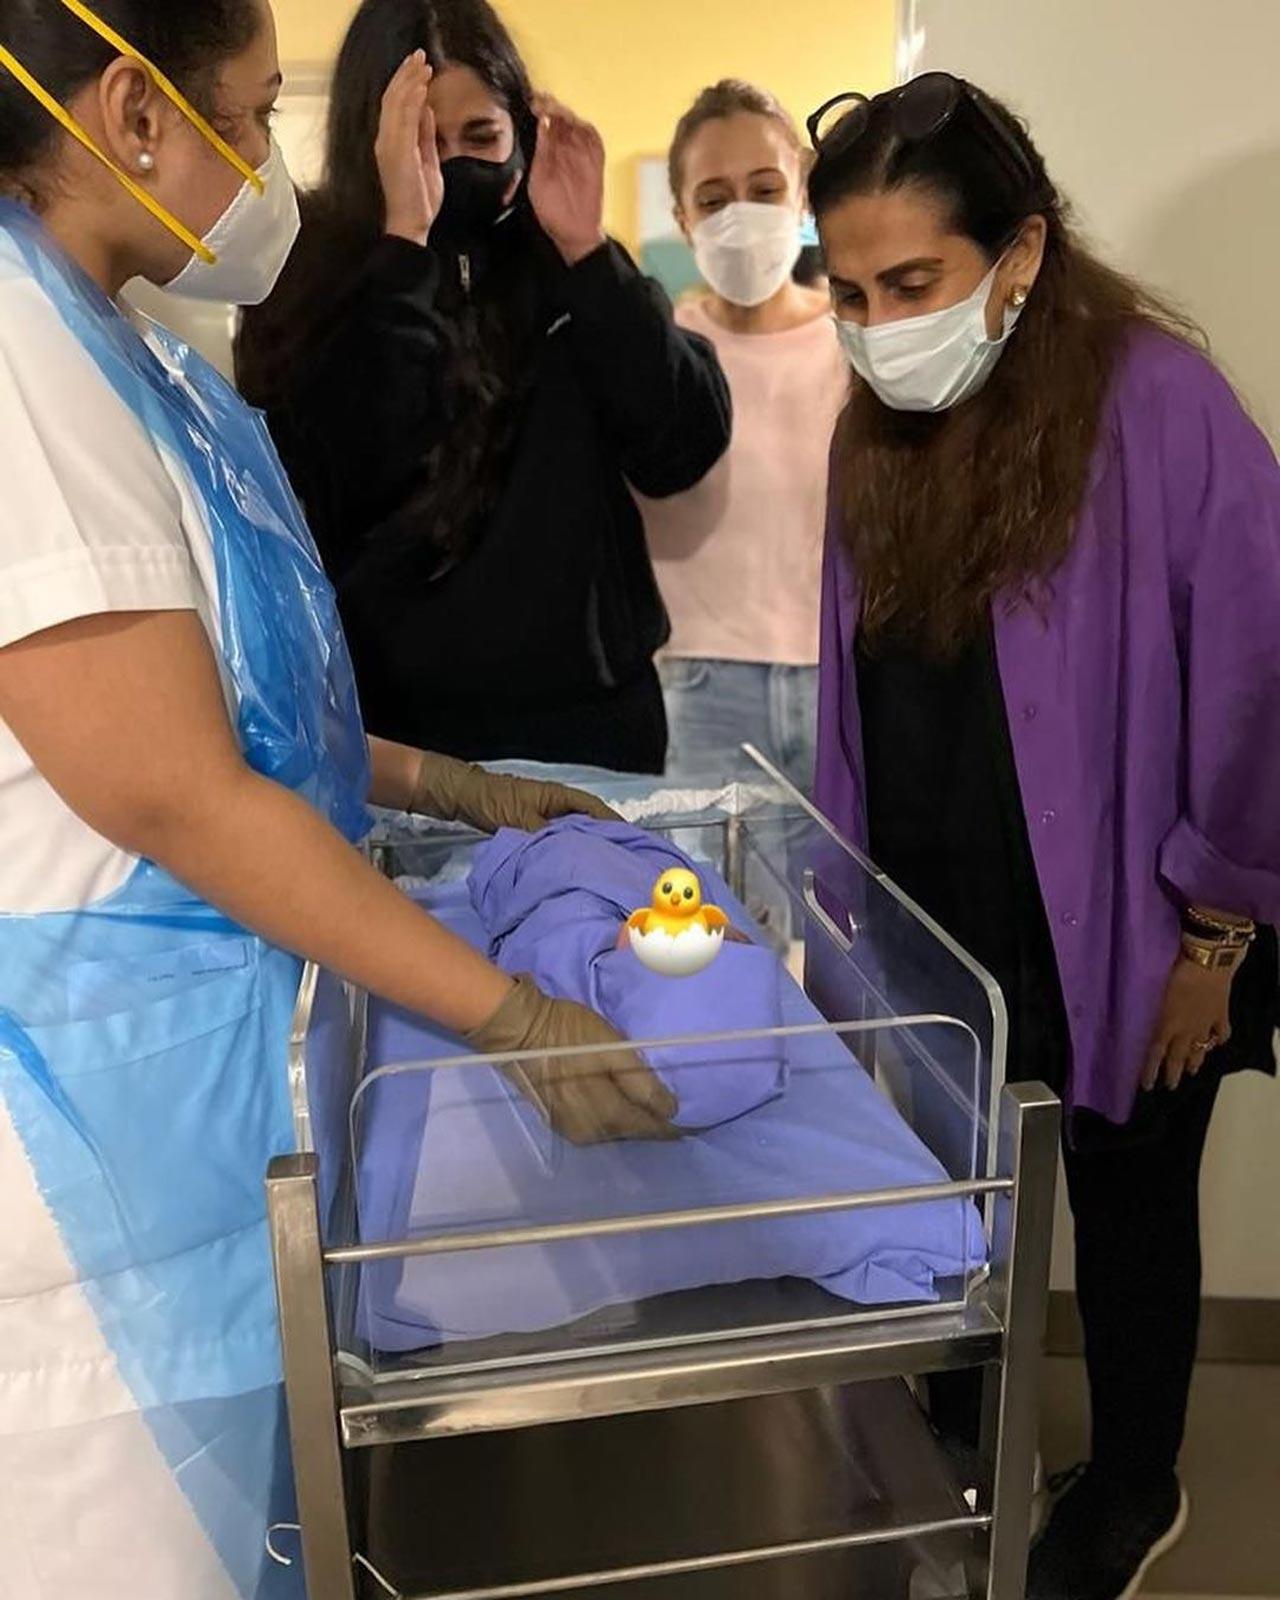 Sonam Kapoor and Anand Ahuja have announced the birth of their baby boy, on Saturday. The news was shared on social media by Neetu Kapoor.